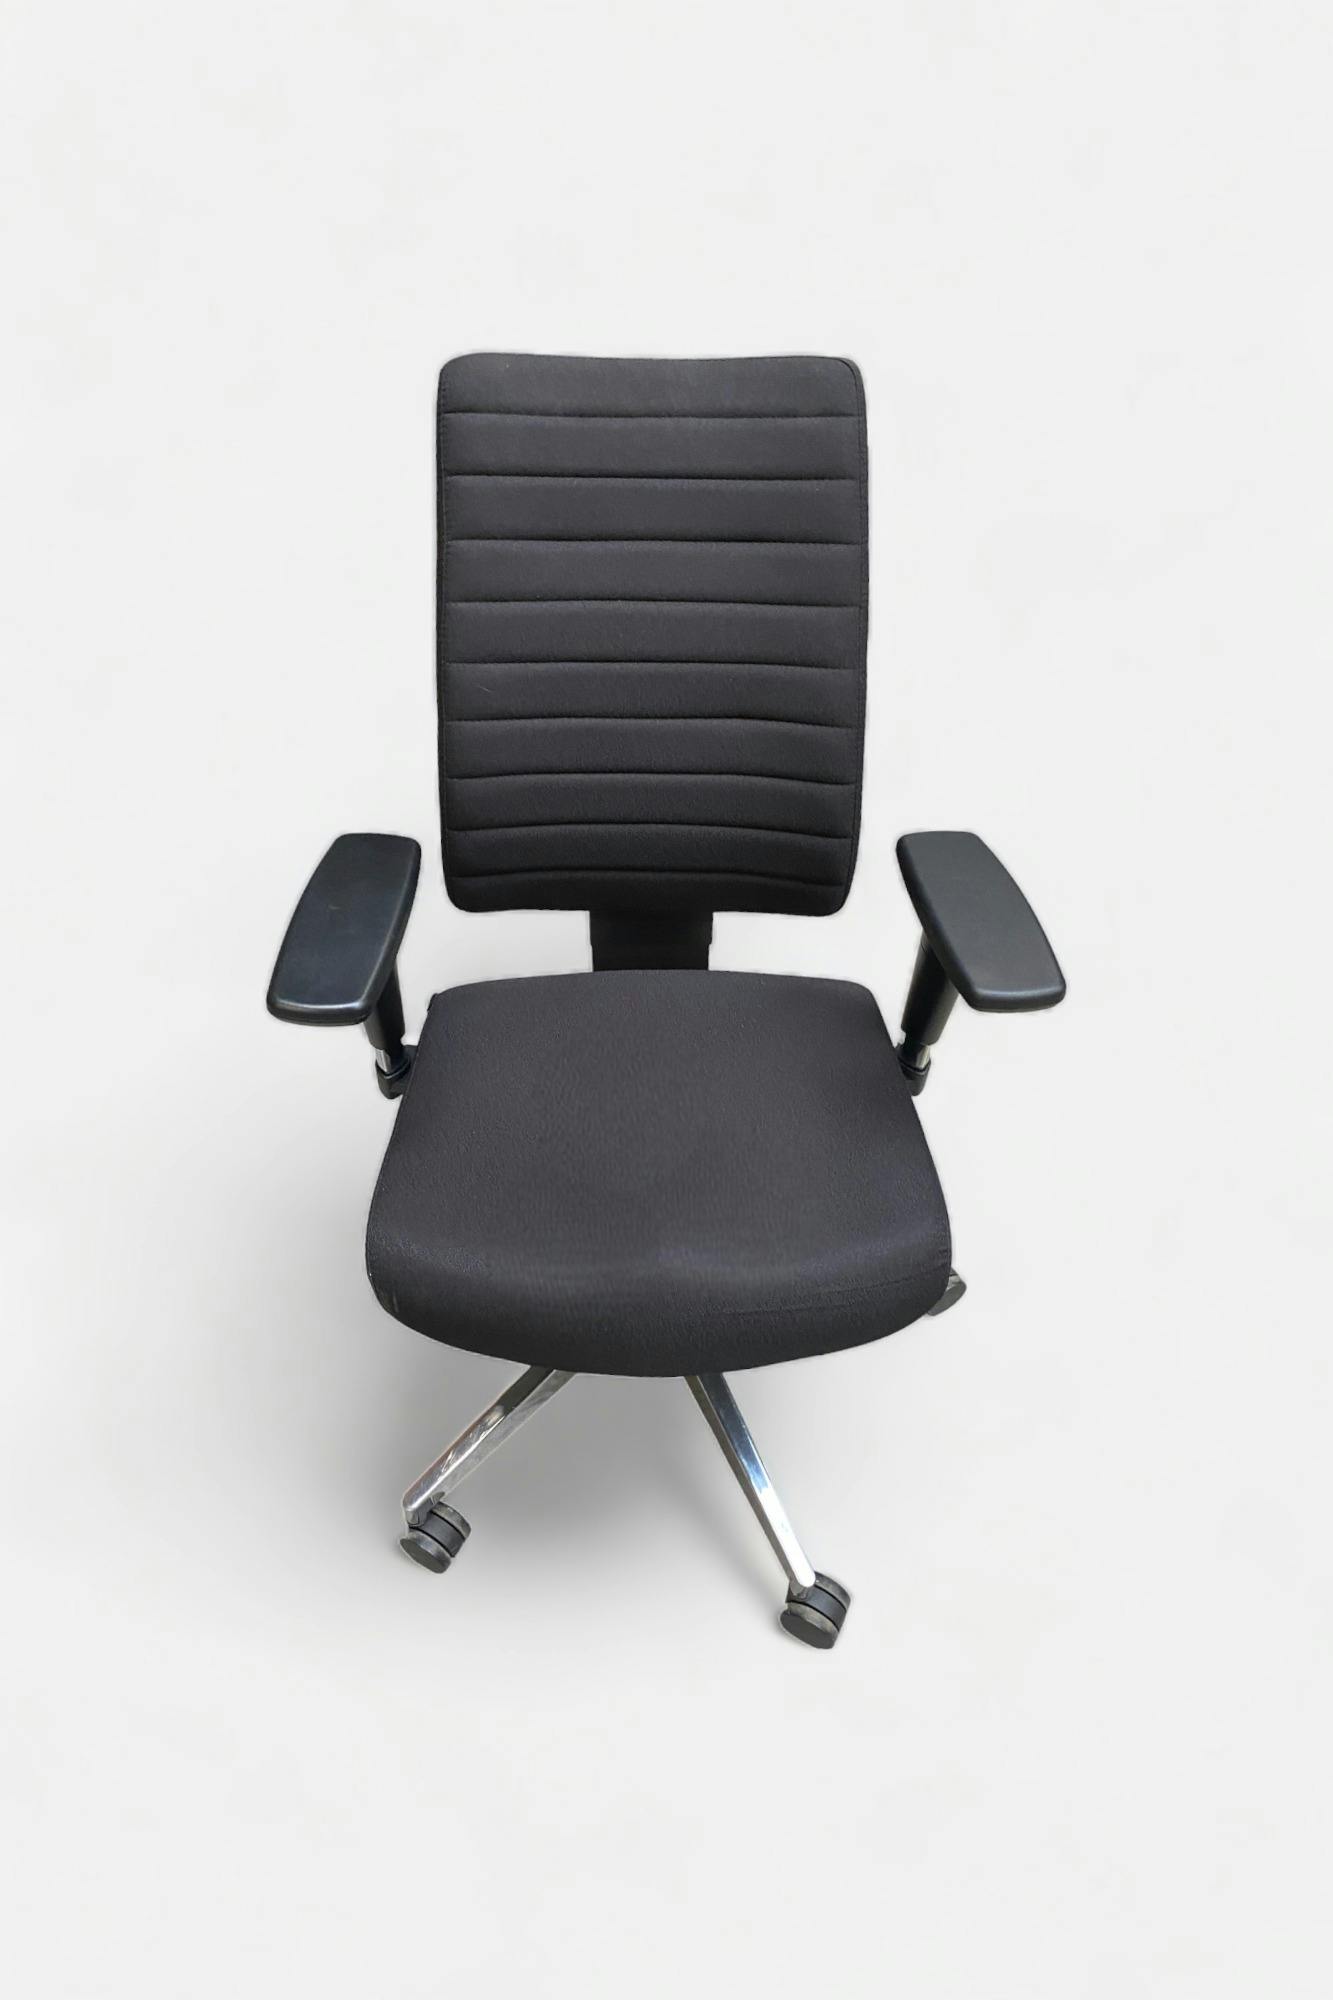 HJH office black office chair on wheels - Relieve Furniture